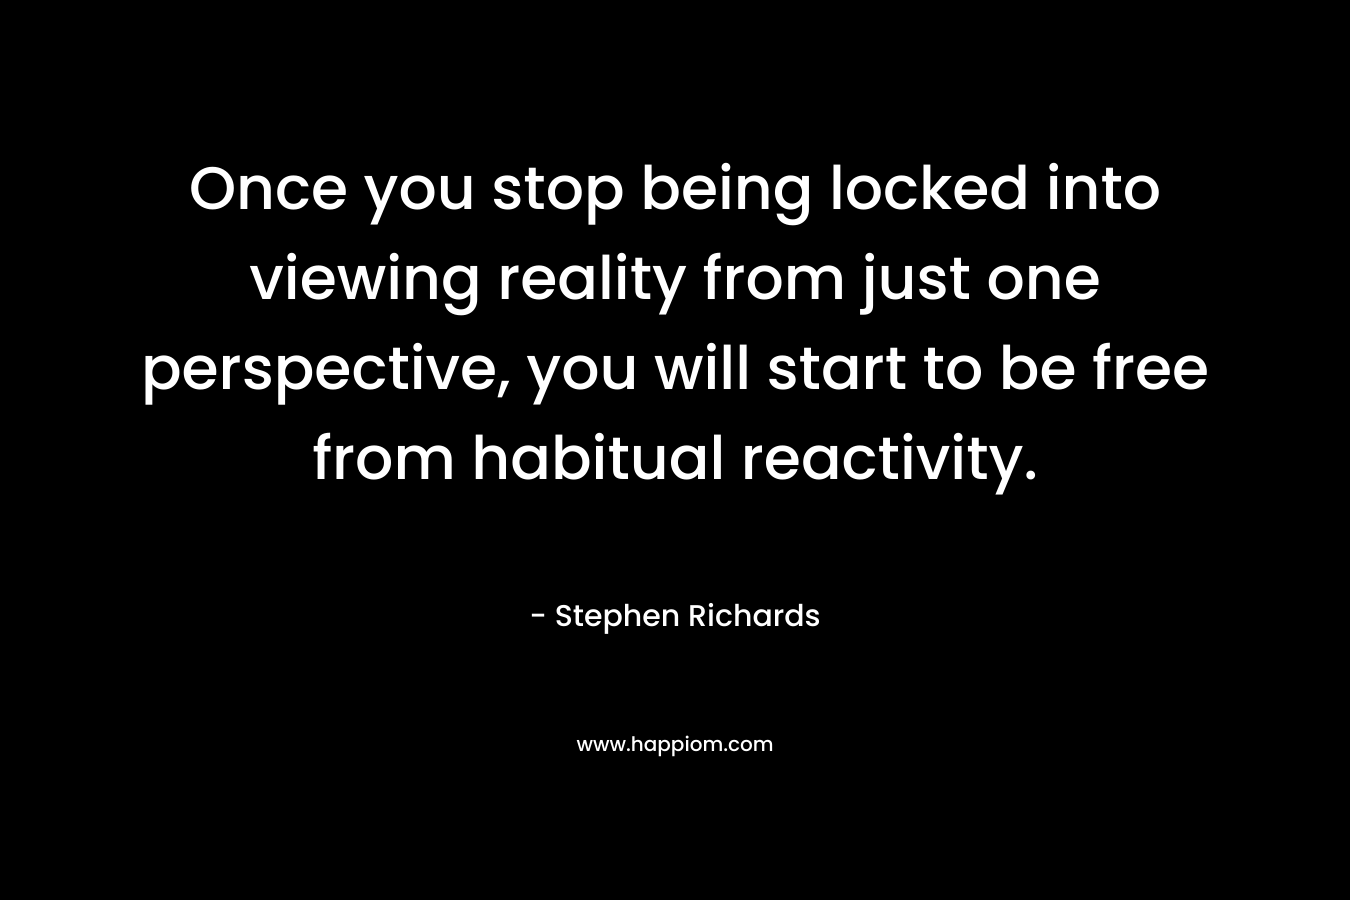 Once you stop being locked into viewing reality from just one perspective, you will start to be free from habitual reactivity.